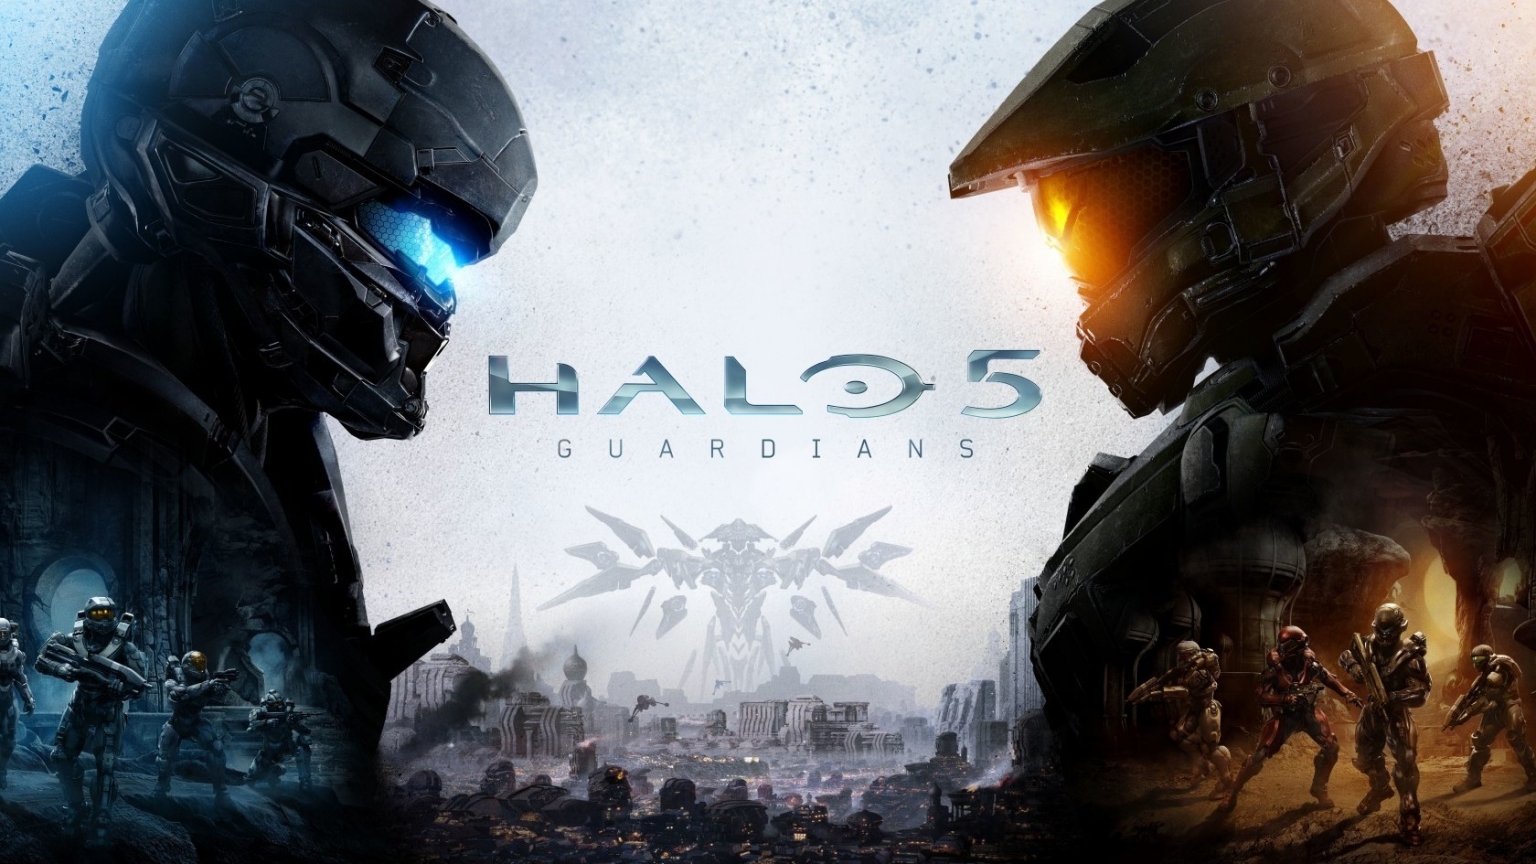 Halo 5 Guardians Game for 1536 x 864 HDTV resolution